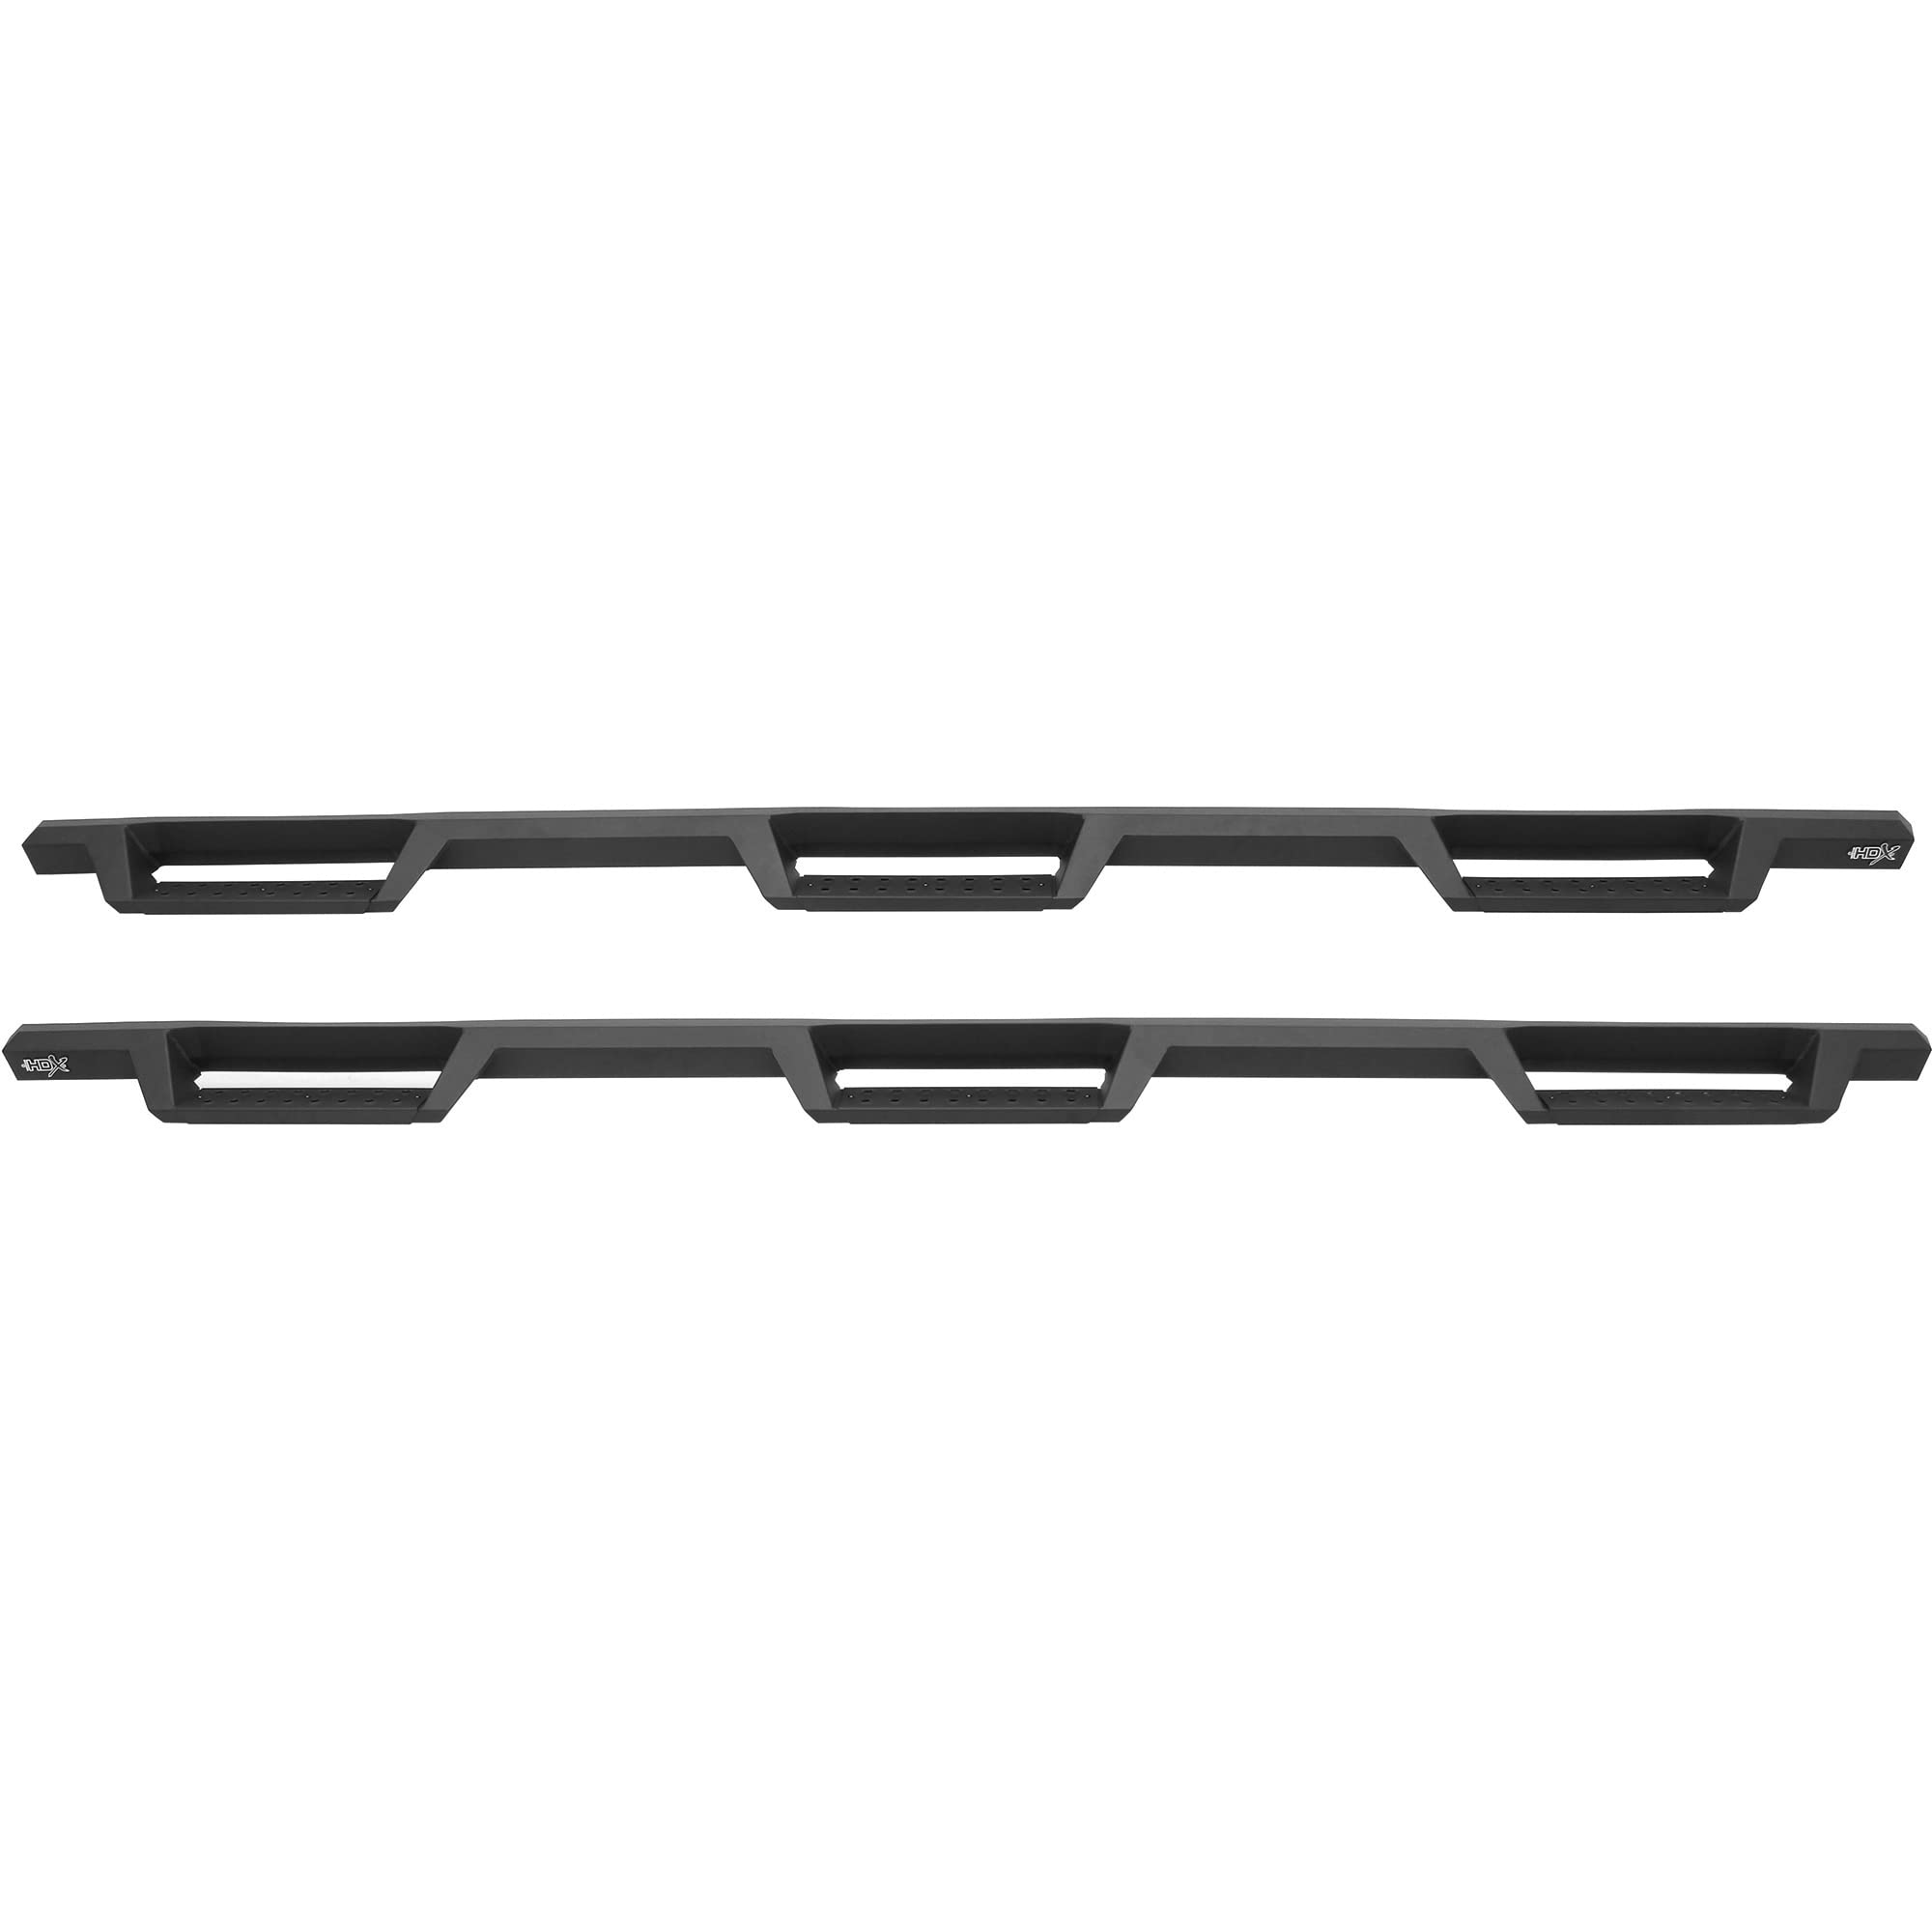 0719 SILVERADO/SIERRA 2500/3500 CREW CAB(8 FT BED)EXCL DUALLY TEXT BLK HDX DROP WTW NERF STEP BARS